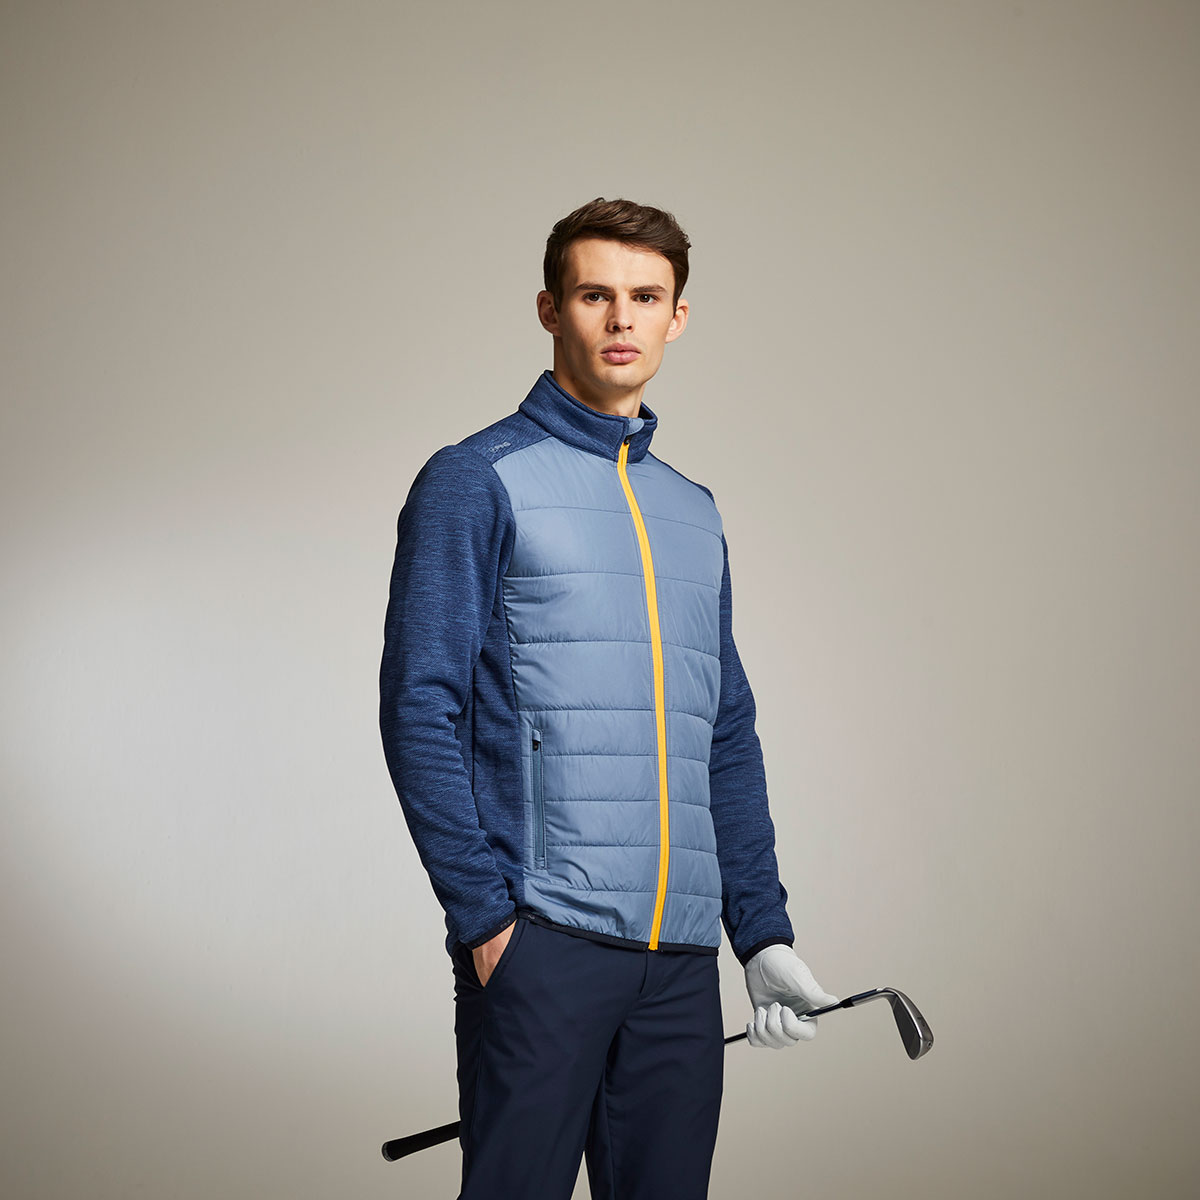 PING Men's Dover Golf Jacket from american golf